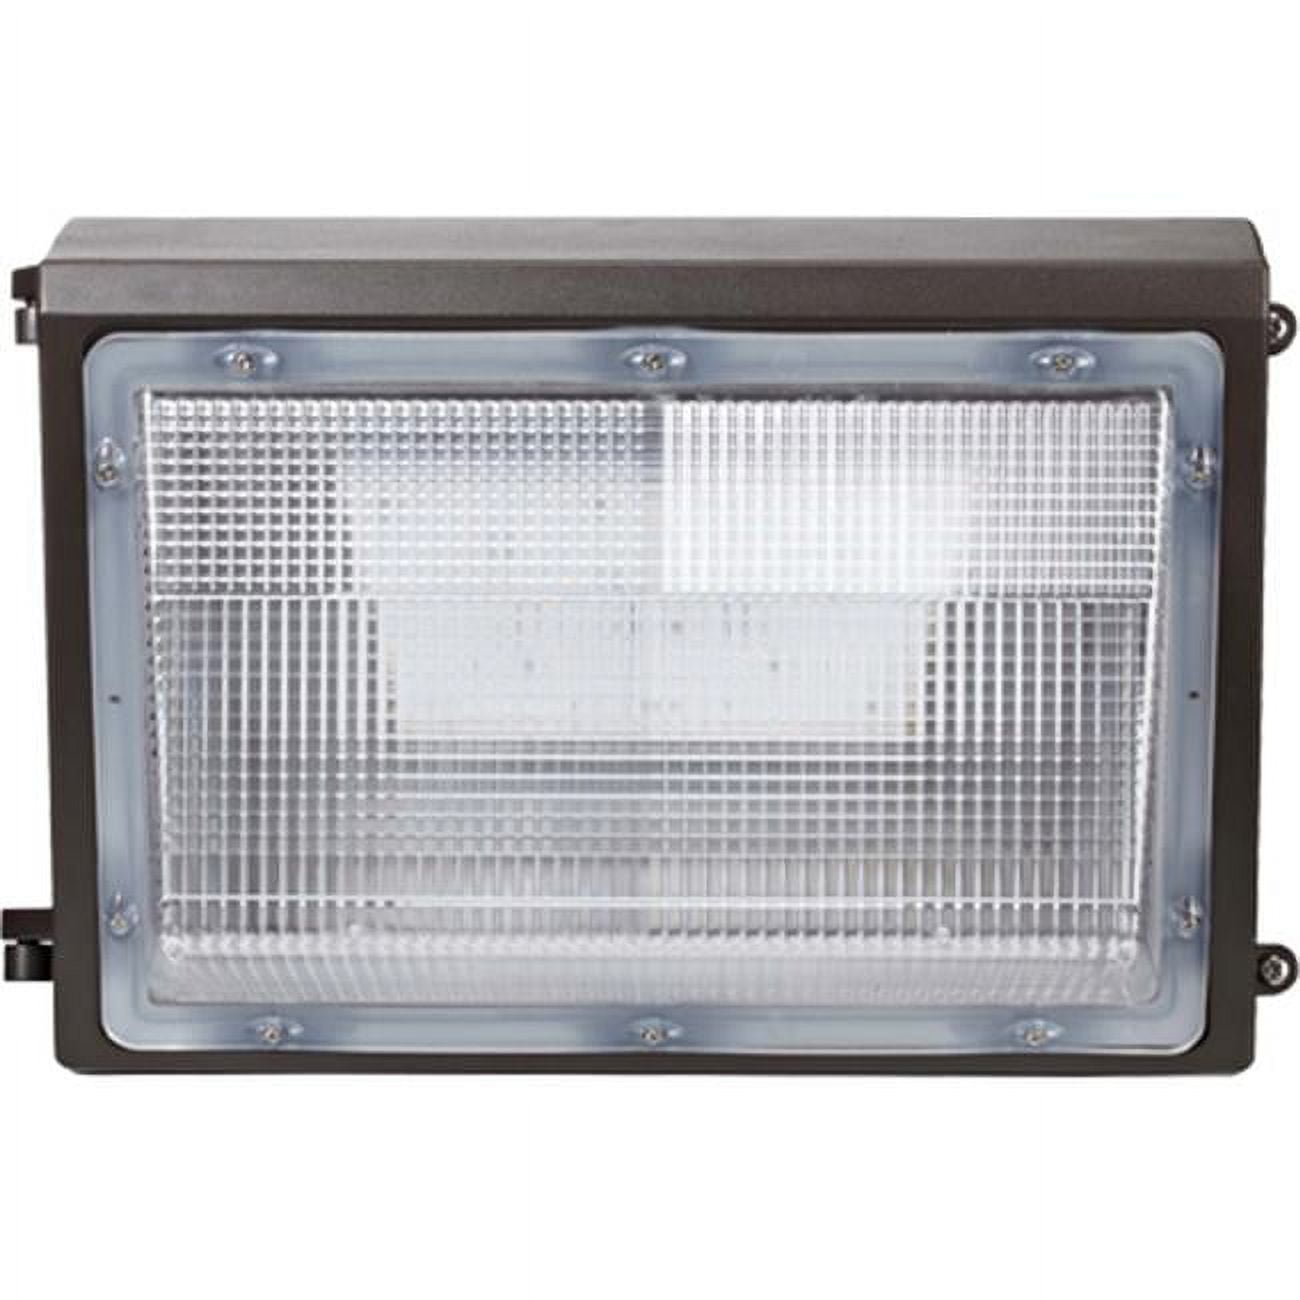 Dw-led1700 9.25 X 14.21 X 7.40 In. 100-277 V 45 Watts Large Wall Pack Fixture With Led Board, Bronze